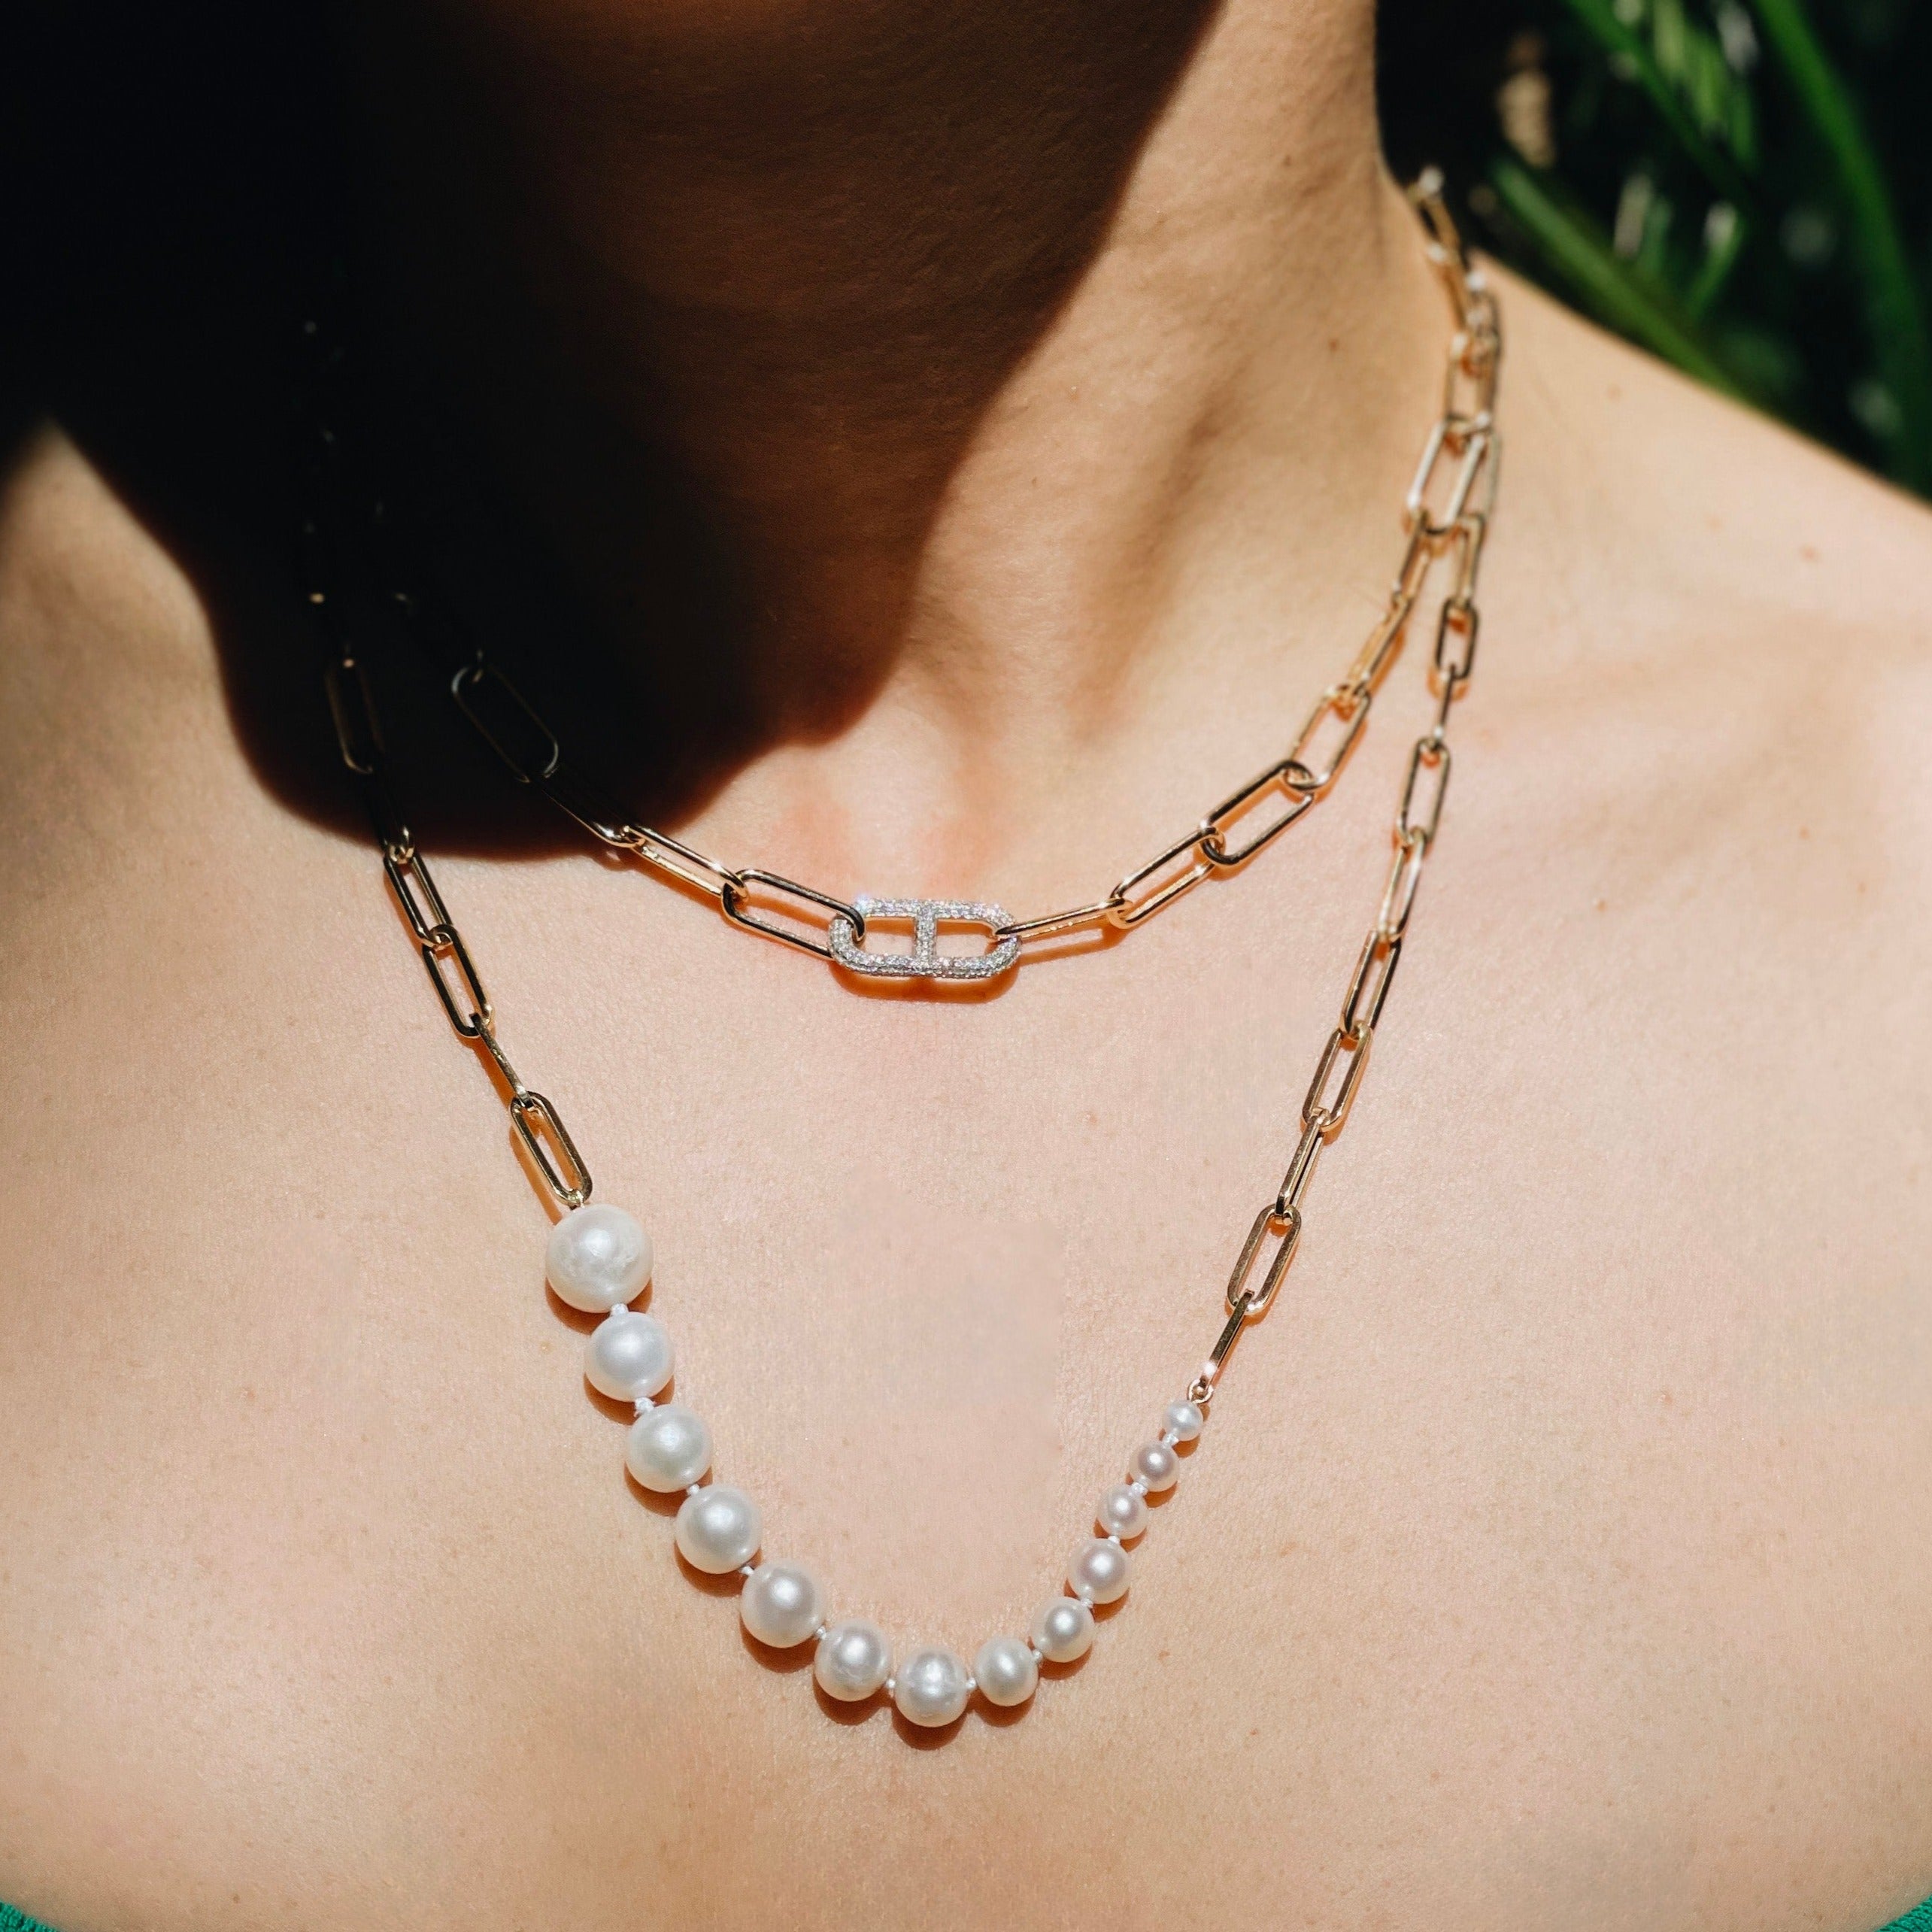 Ascending Pearls Necklace on Rectangular Chain